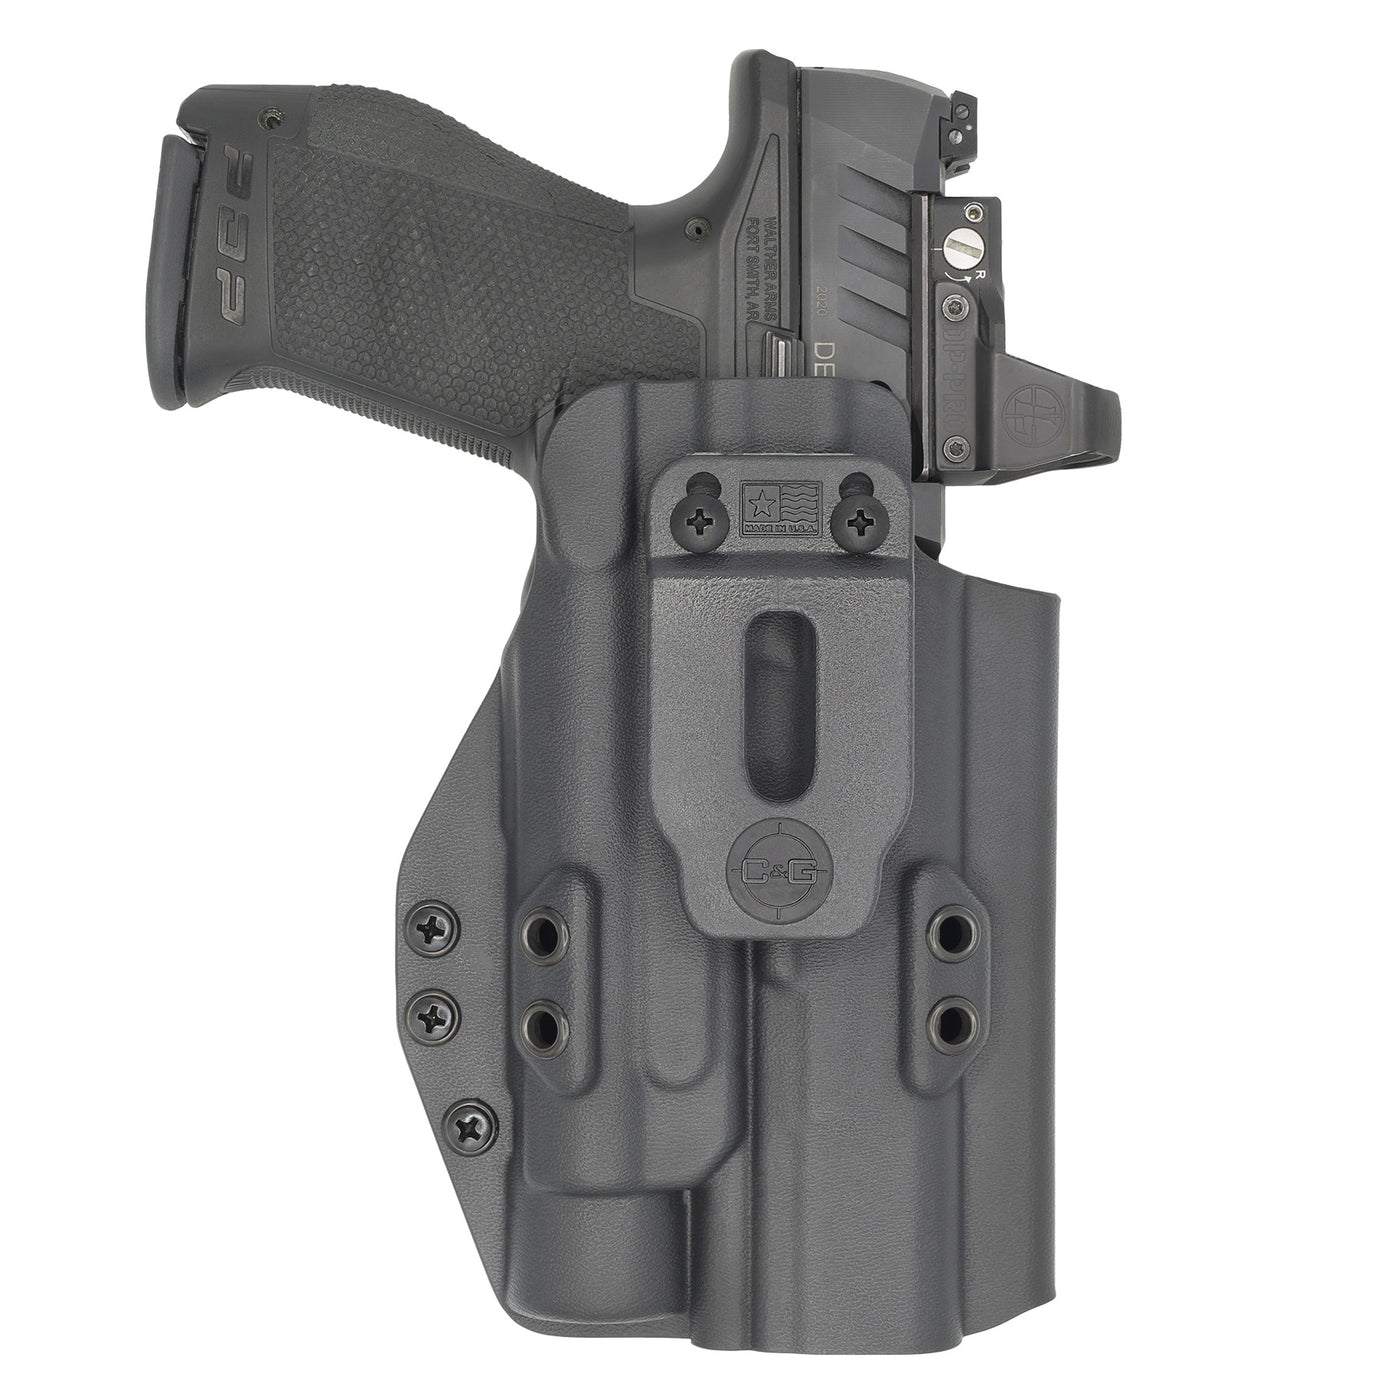 C&G Holsters Quickship IWB Tactical FN 509 Streamlight TLR1 in holstered position